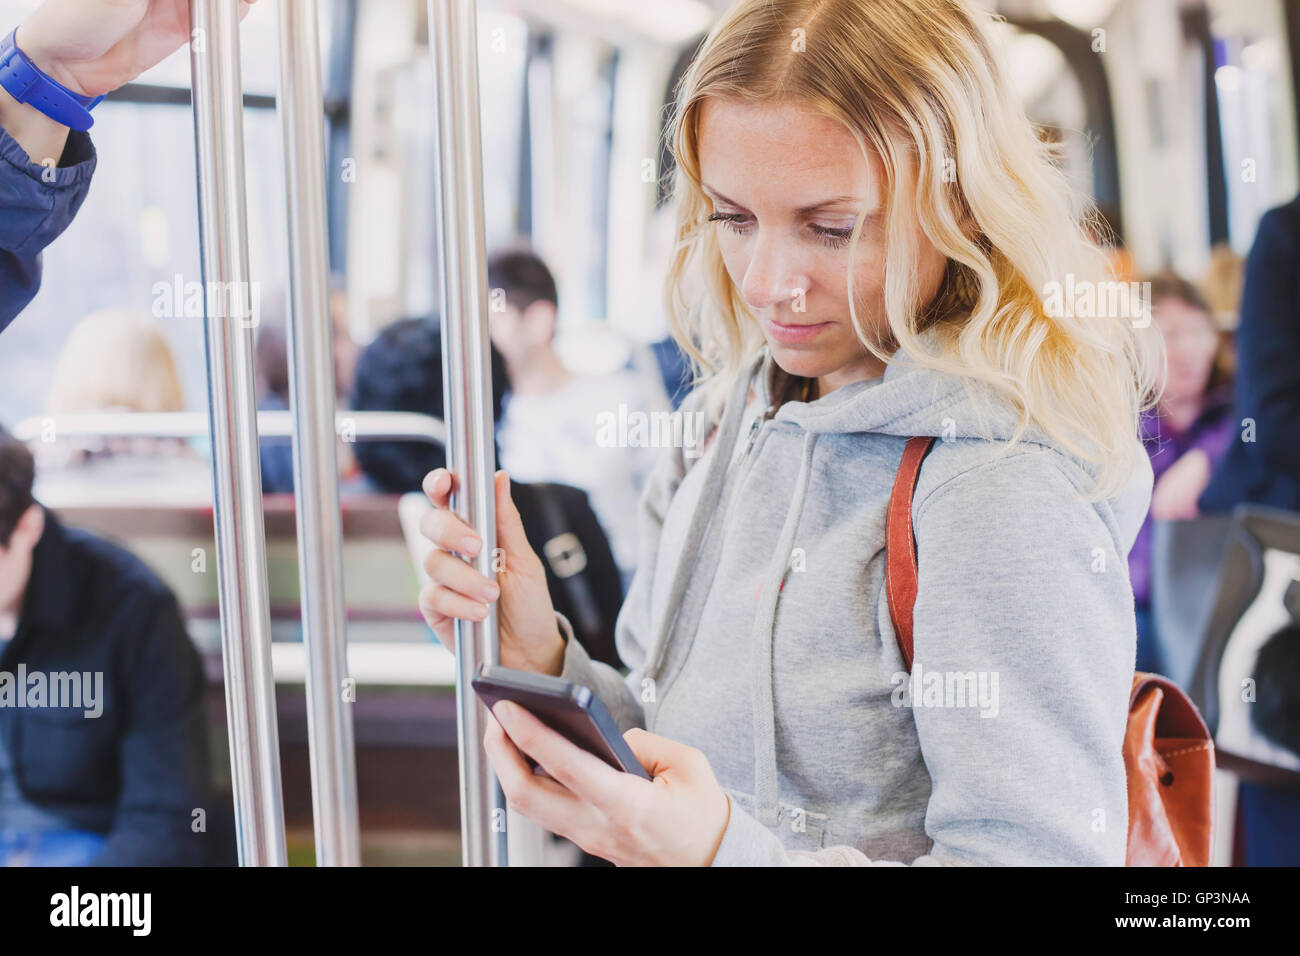 people in metro, commuters, woman passenger looking at the screen of her smartphone Stock Photo